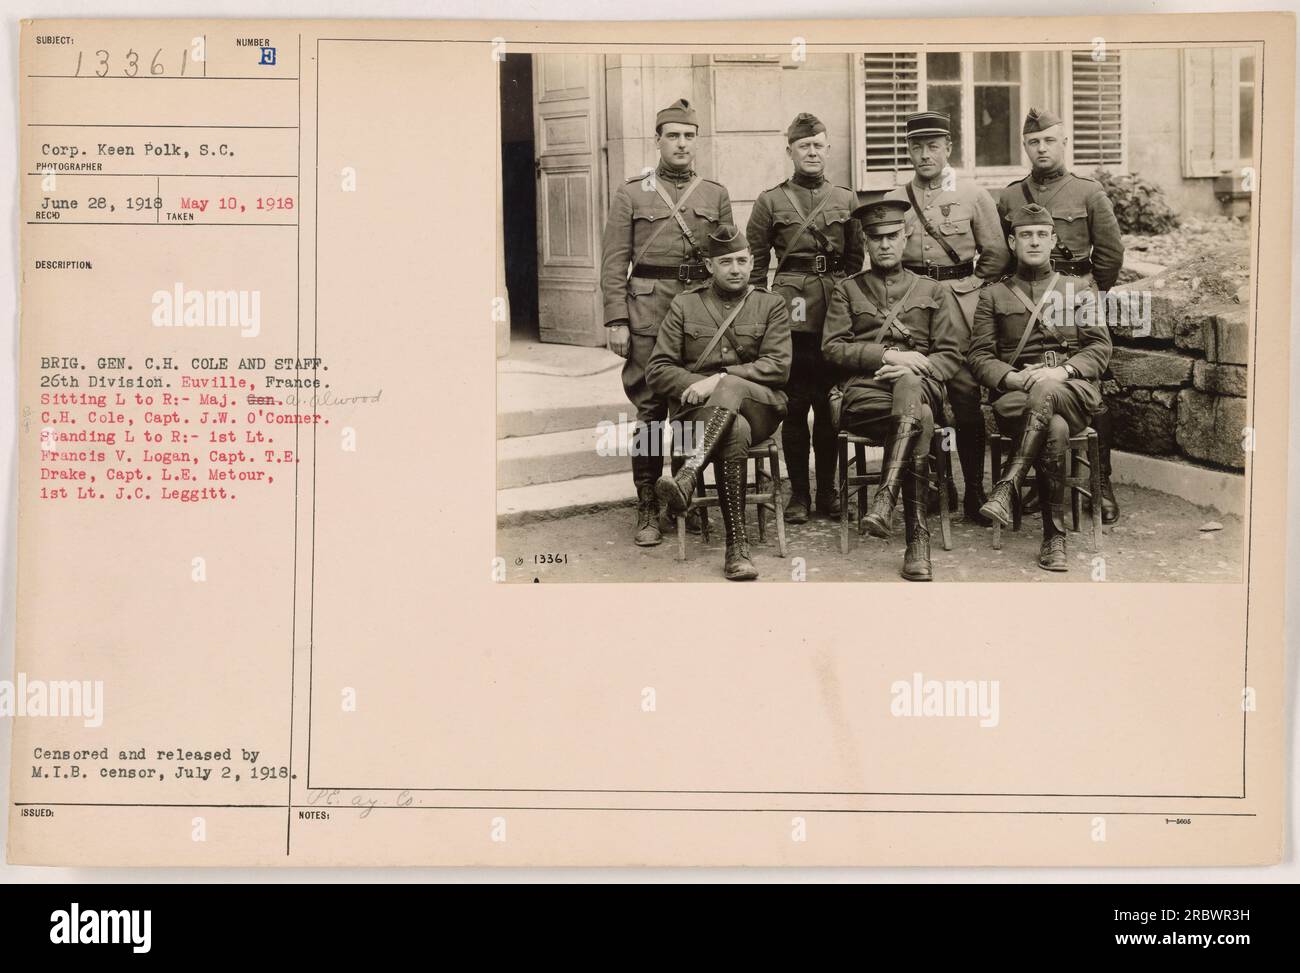 Brig. Gen. C.H. Cole and his staff from the 26th Division are pictured in Euville, France on June 28, 1918. The individuals in the photo are identified as Maj. Gen. C.H. Cole, Capt. J. O'Conner, 1st Lt. Francis V. Logan, Capt. T.E. Drake, Capt. L.E. Metour, and 1st Lt. J.C. Leggitt. The photo was censored and released by M.I.B. censor on July 2, 1918. Stock Photo